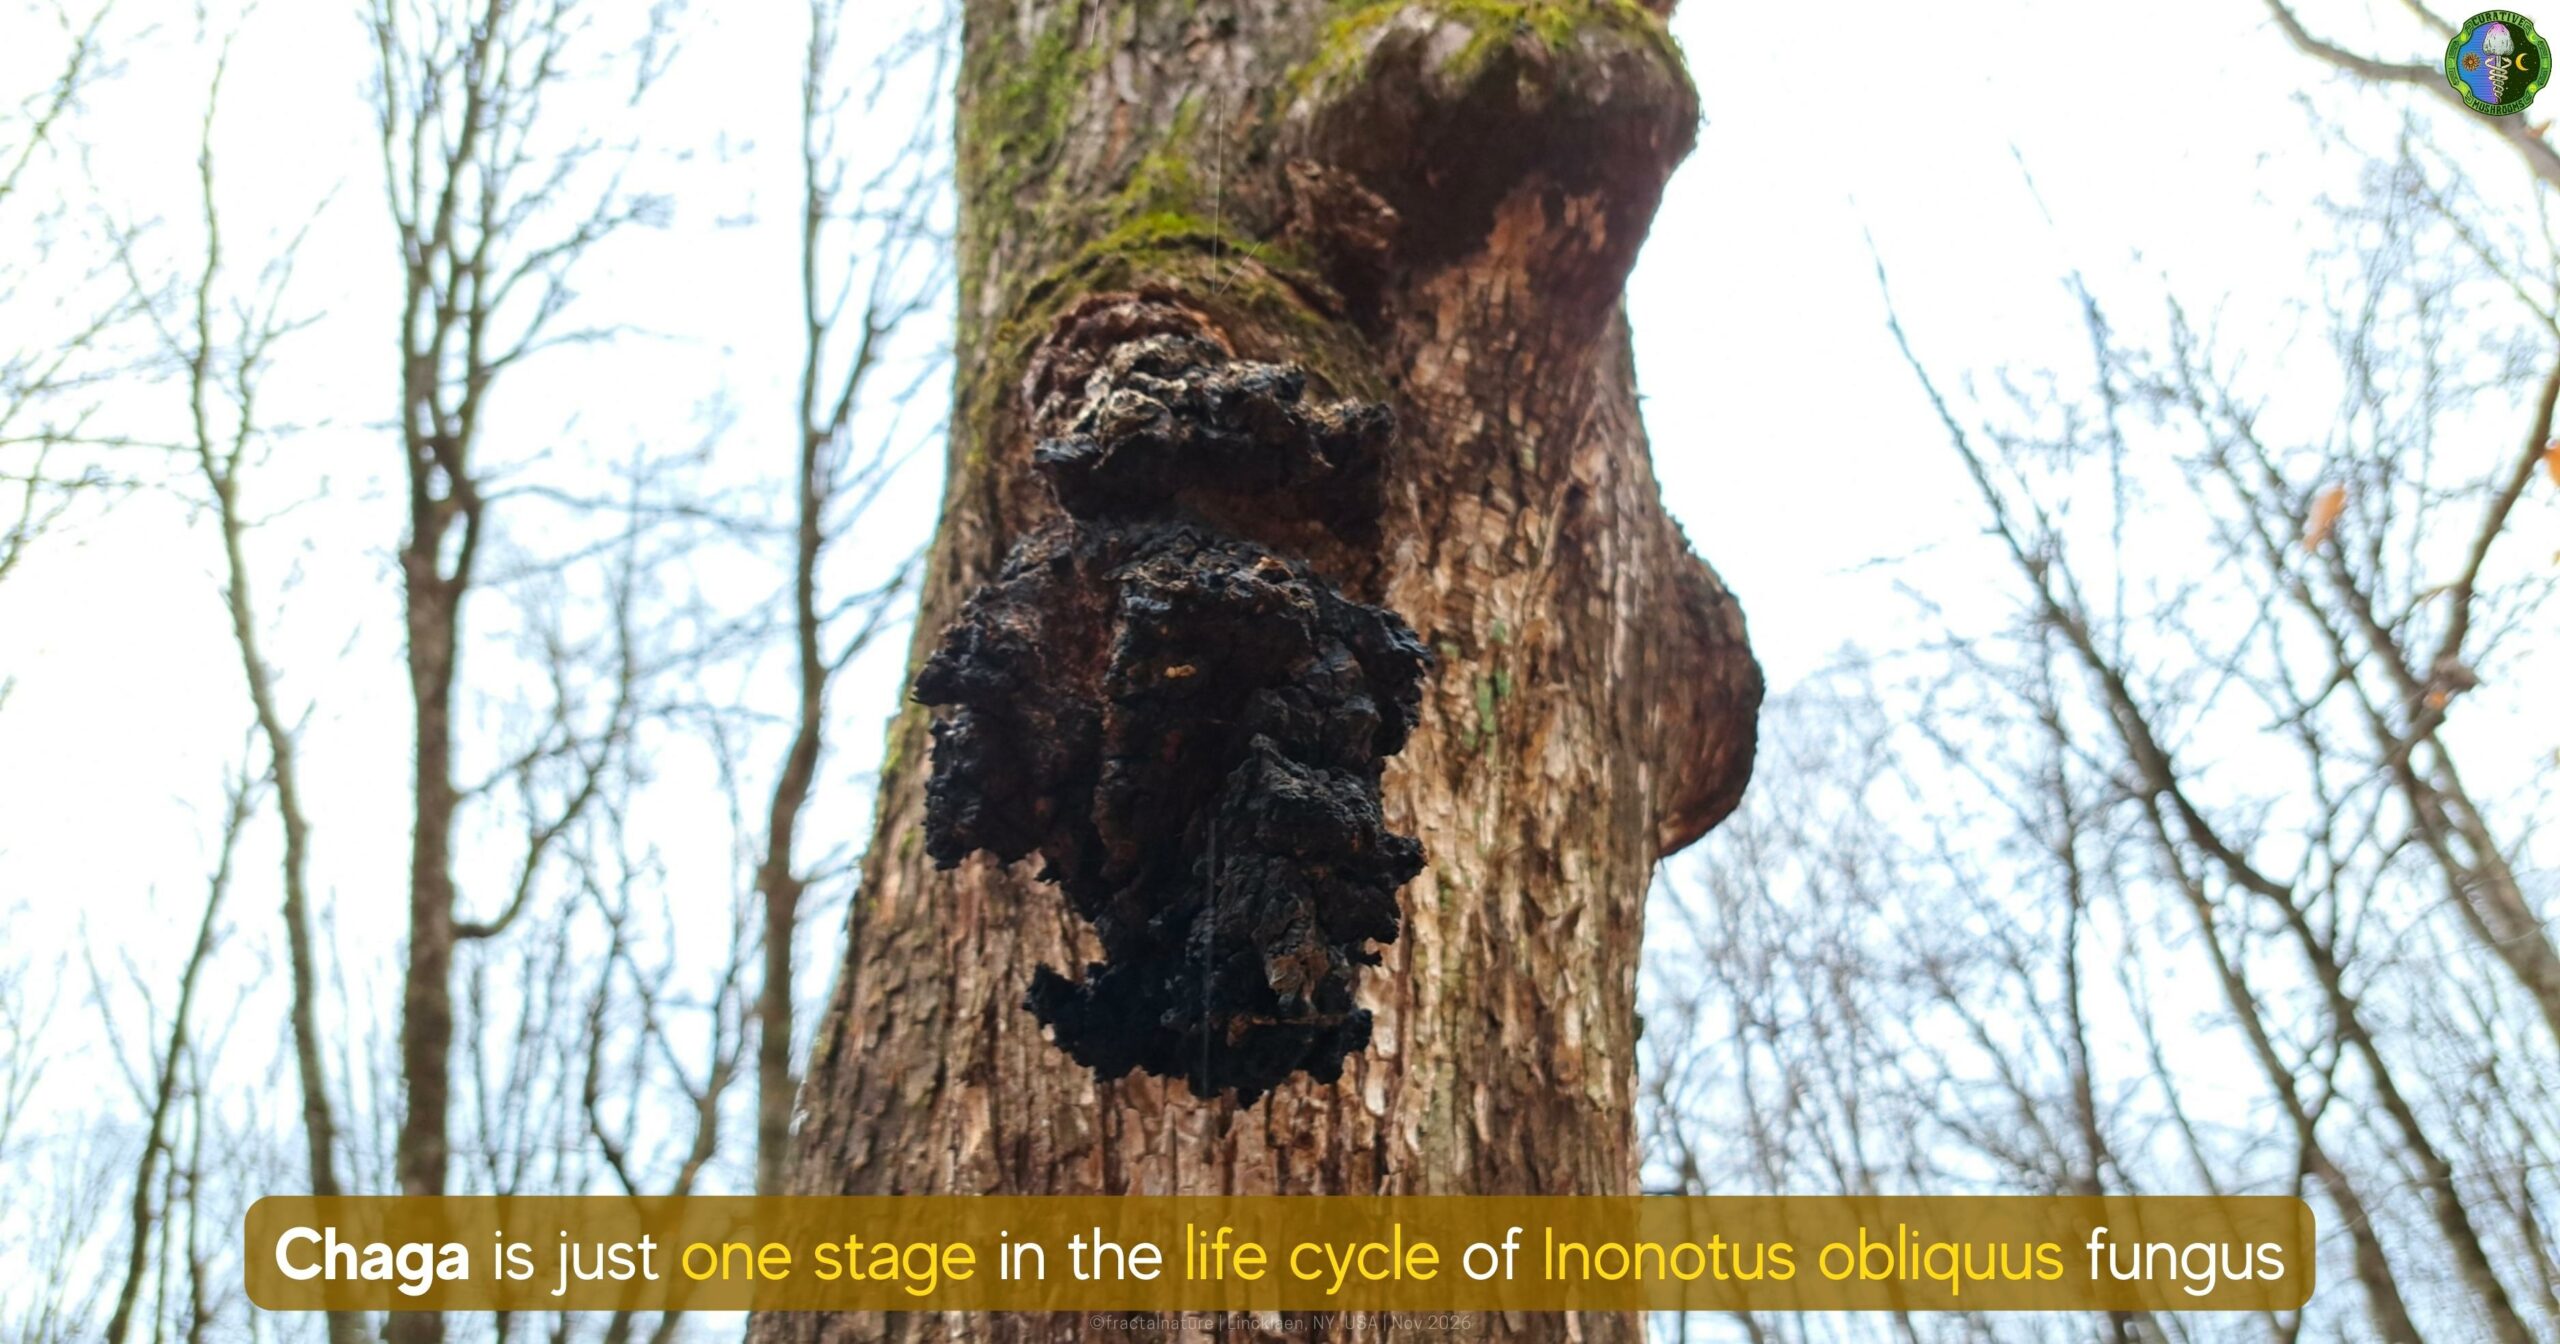 Chaga is just one stage in the life cycle of Inonotus obliquus fungus - sclerotia and sterile conk explained